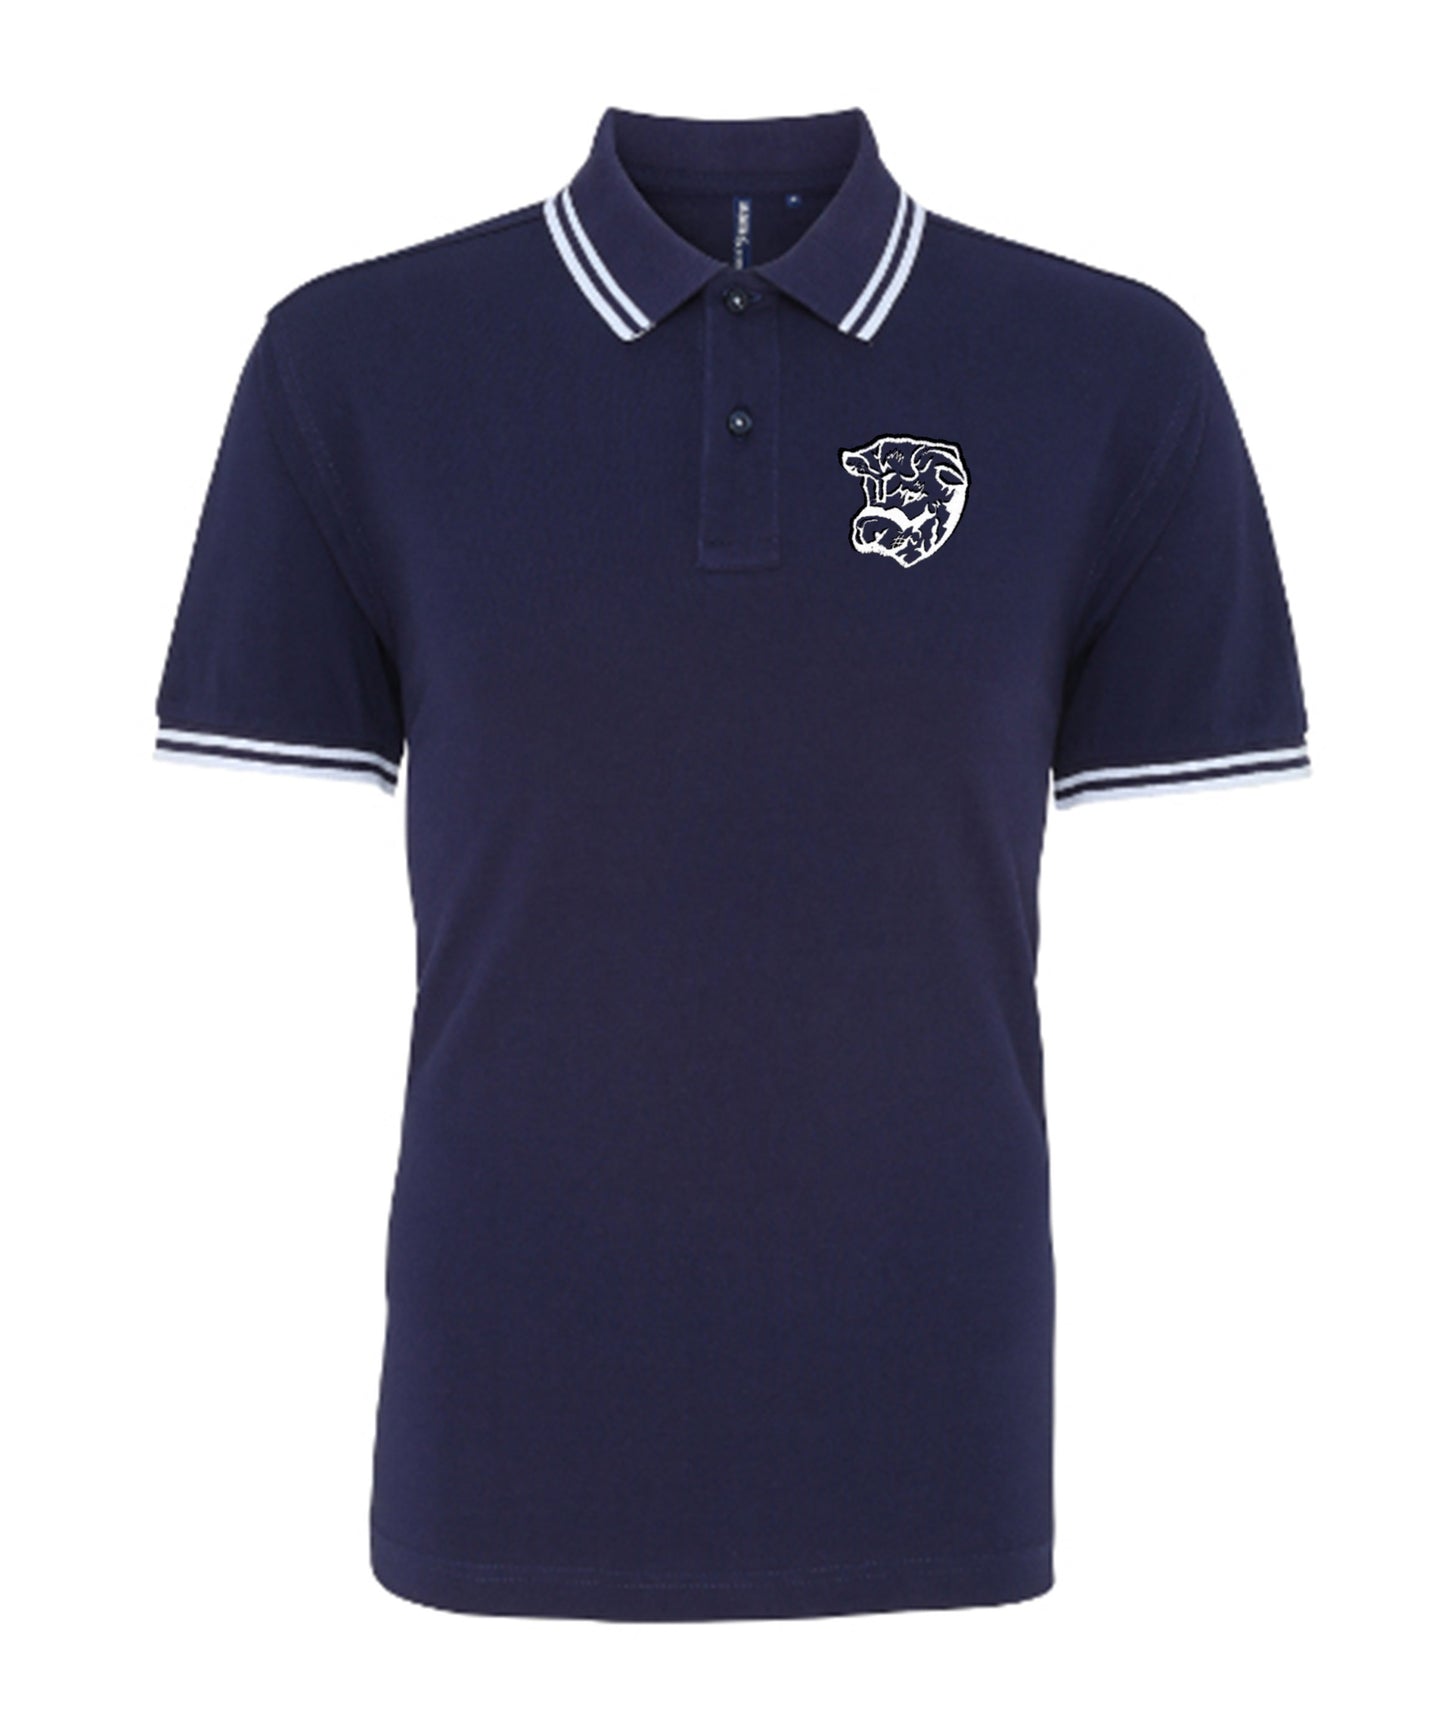 Hereford United Retro Football Iconic Polo 1960s